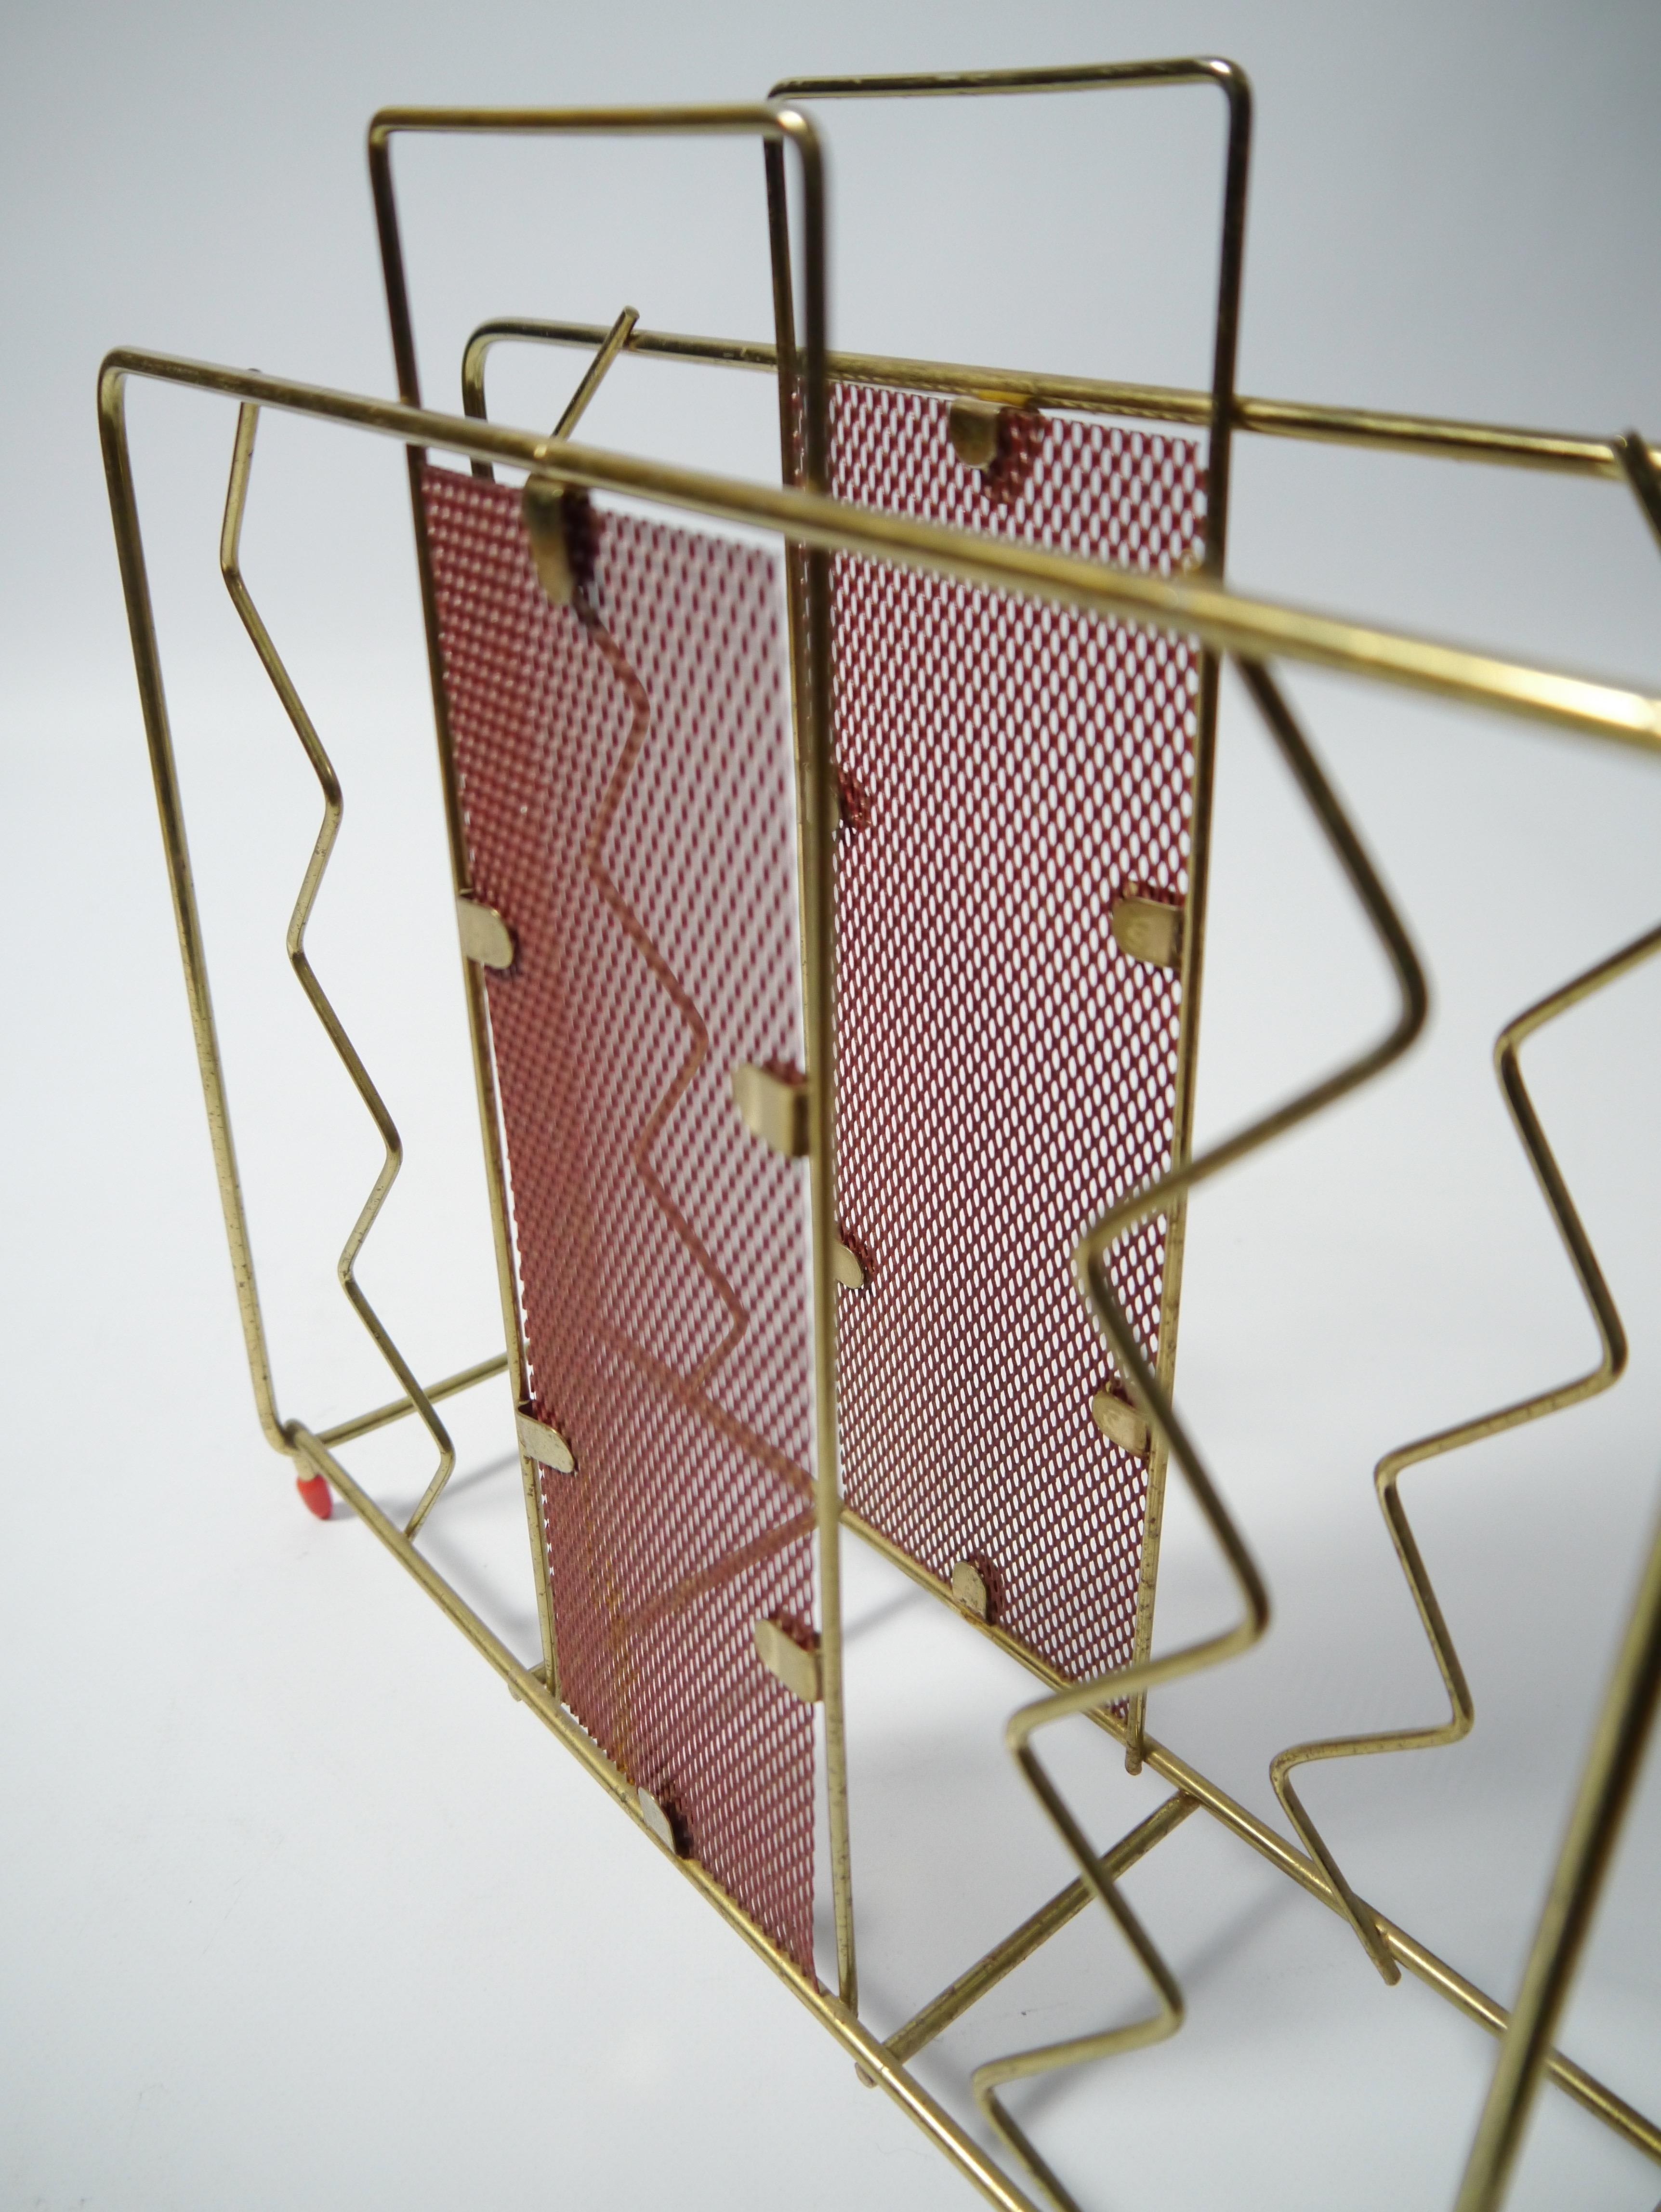 Pair of Mid-Century Modern Brass Plated & Red Magazine Racks, Sweden, 1950s For Sale 1